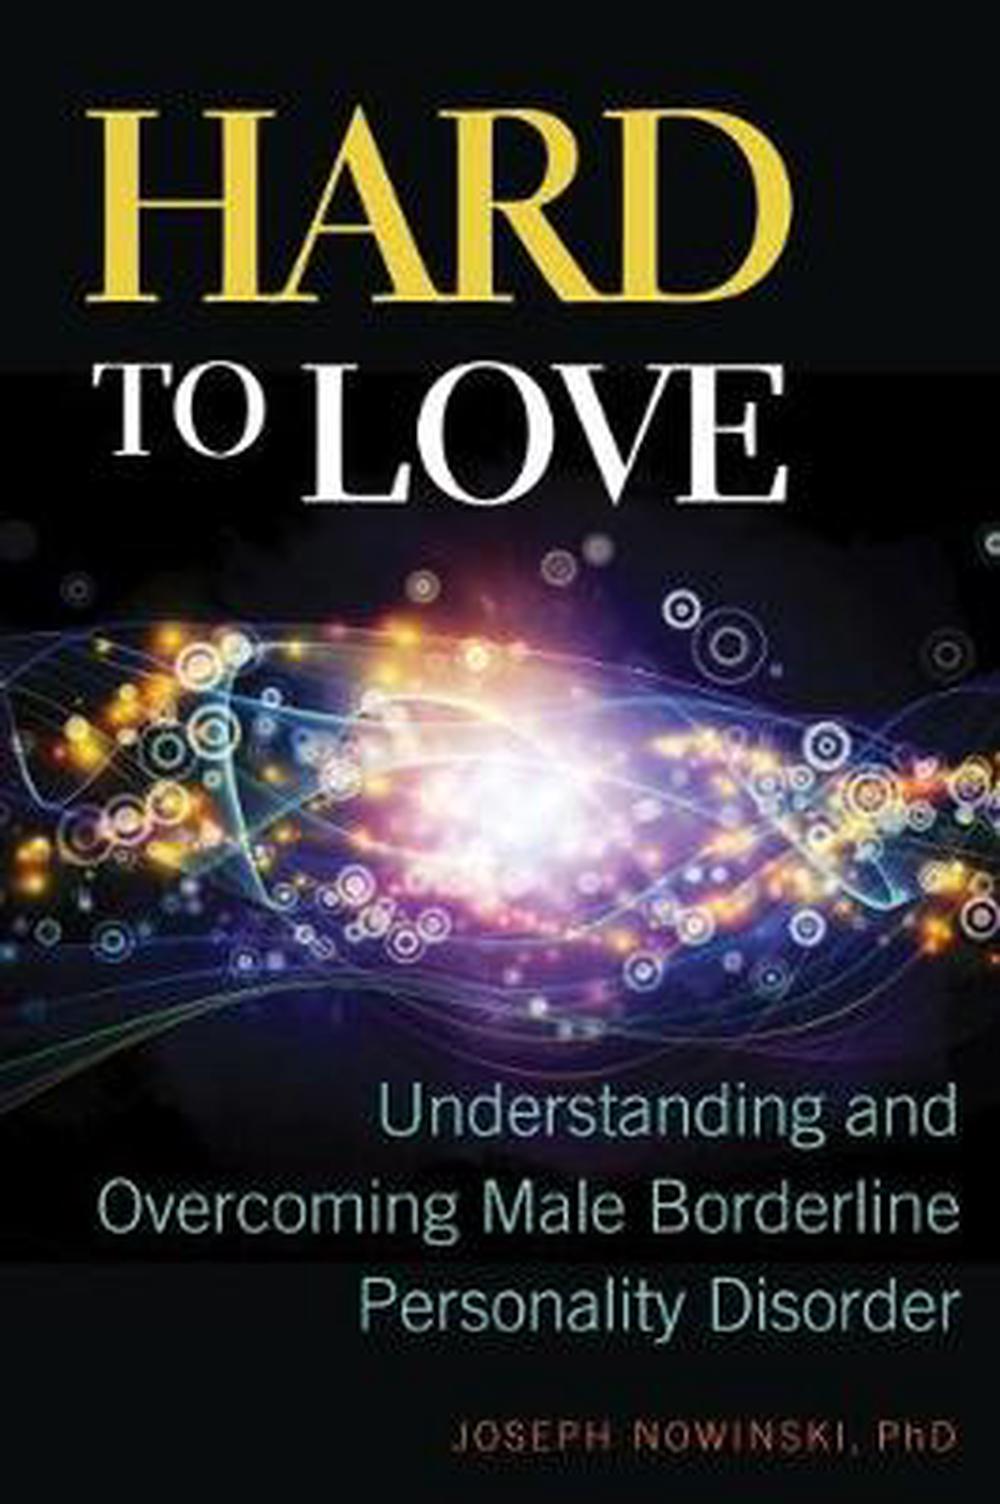 Hard to Love Understanding and Male Borderline Personality